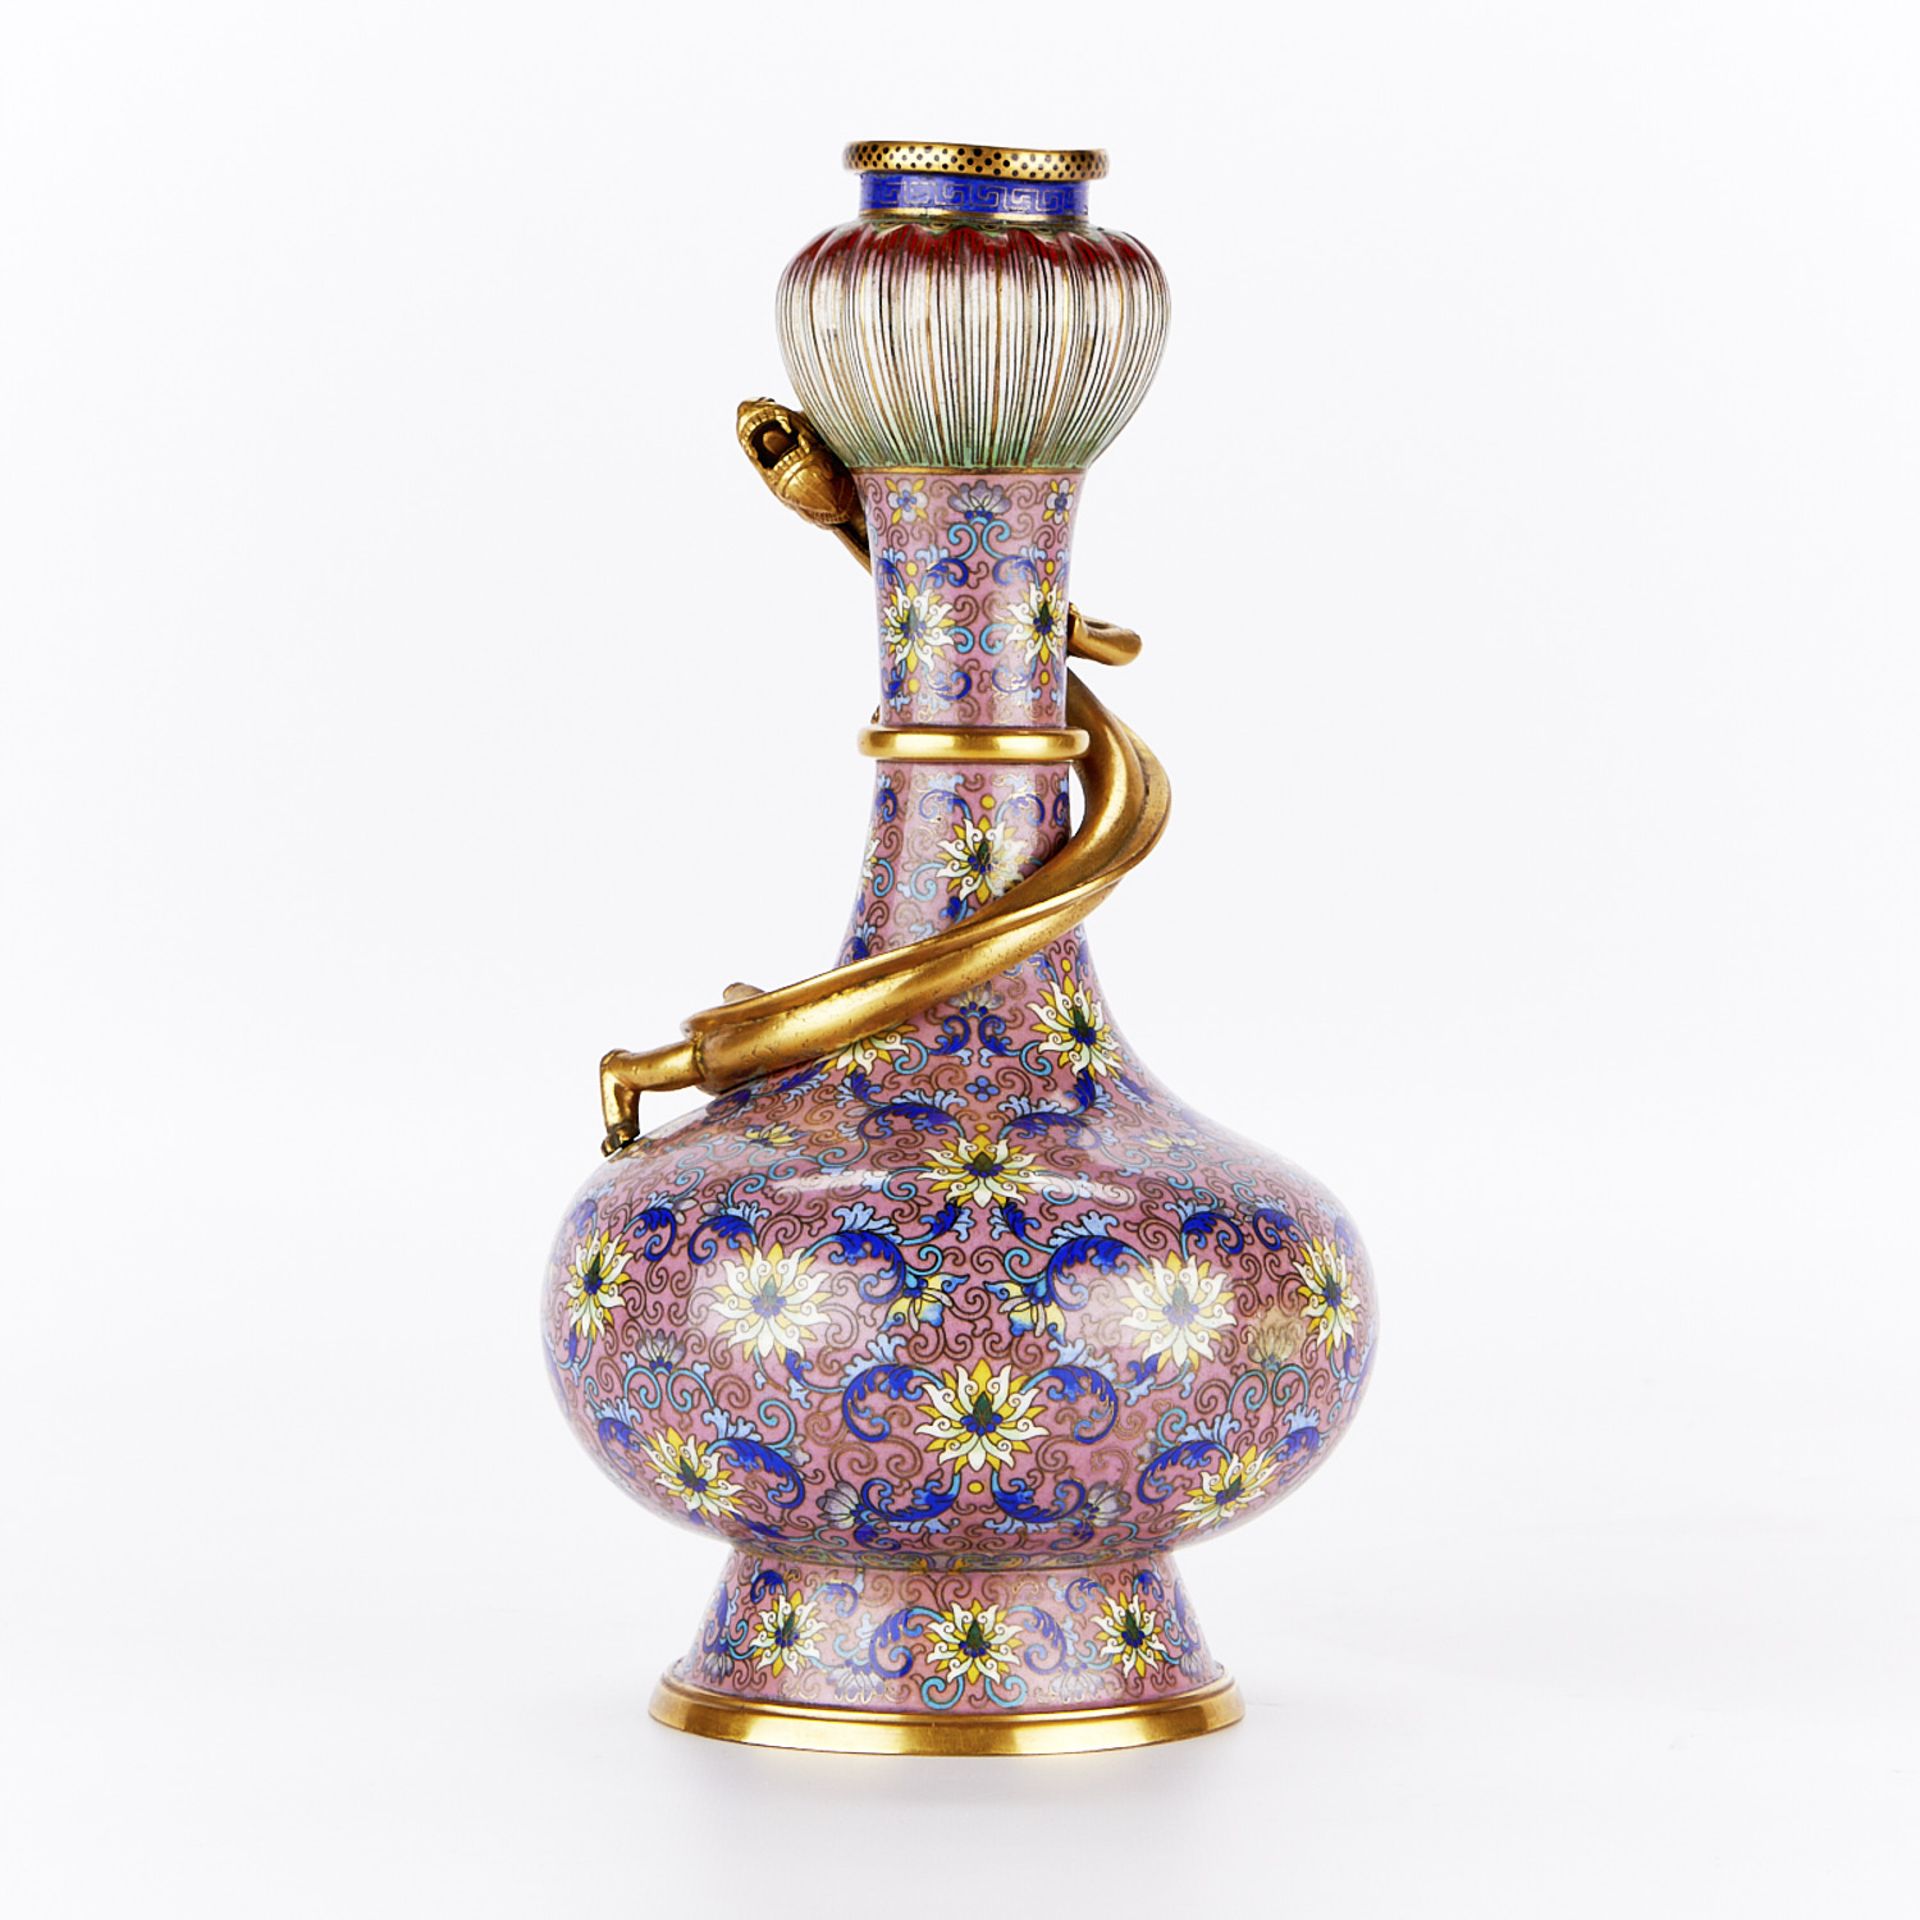 De Xing Cheng Chinese Cloisonne Vase w/ Dragon - Image 5 of 10